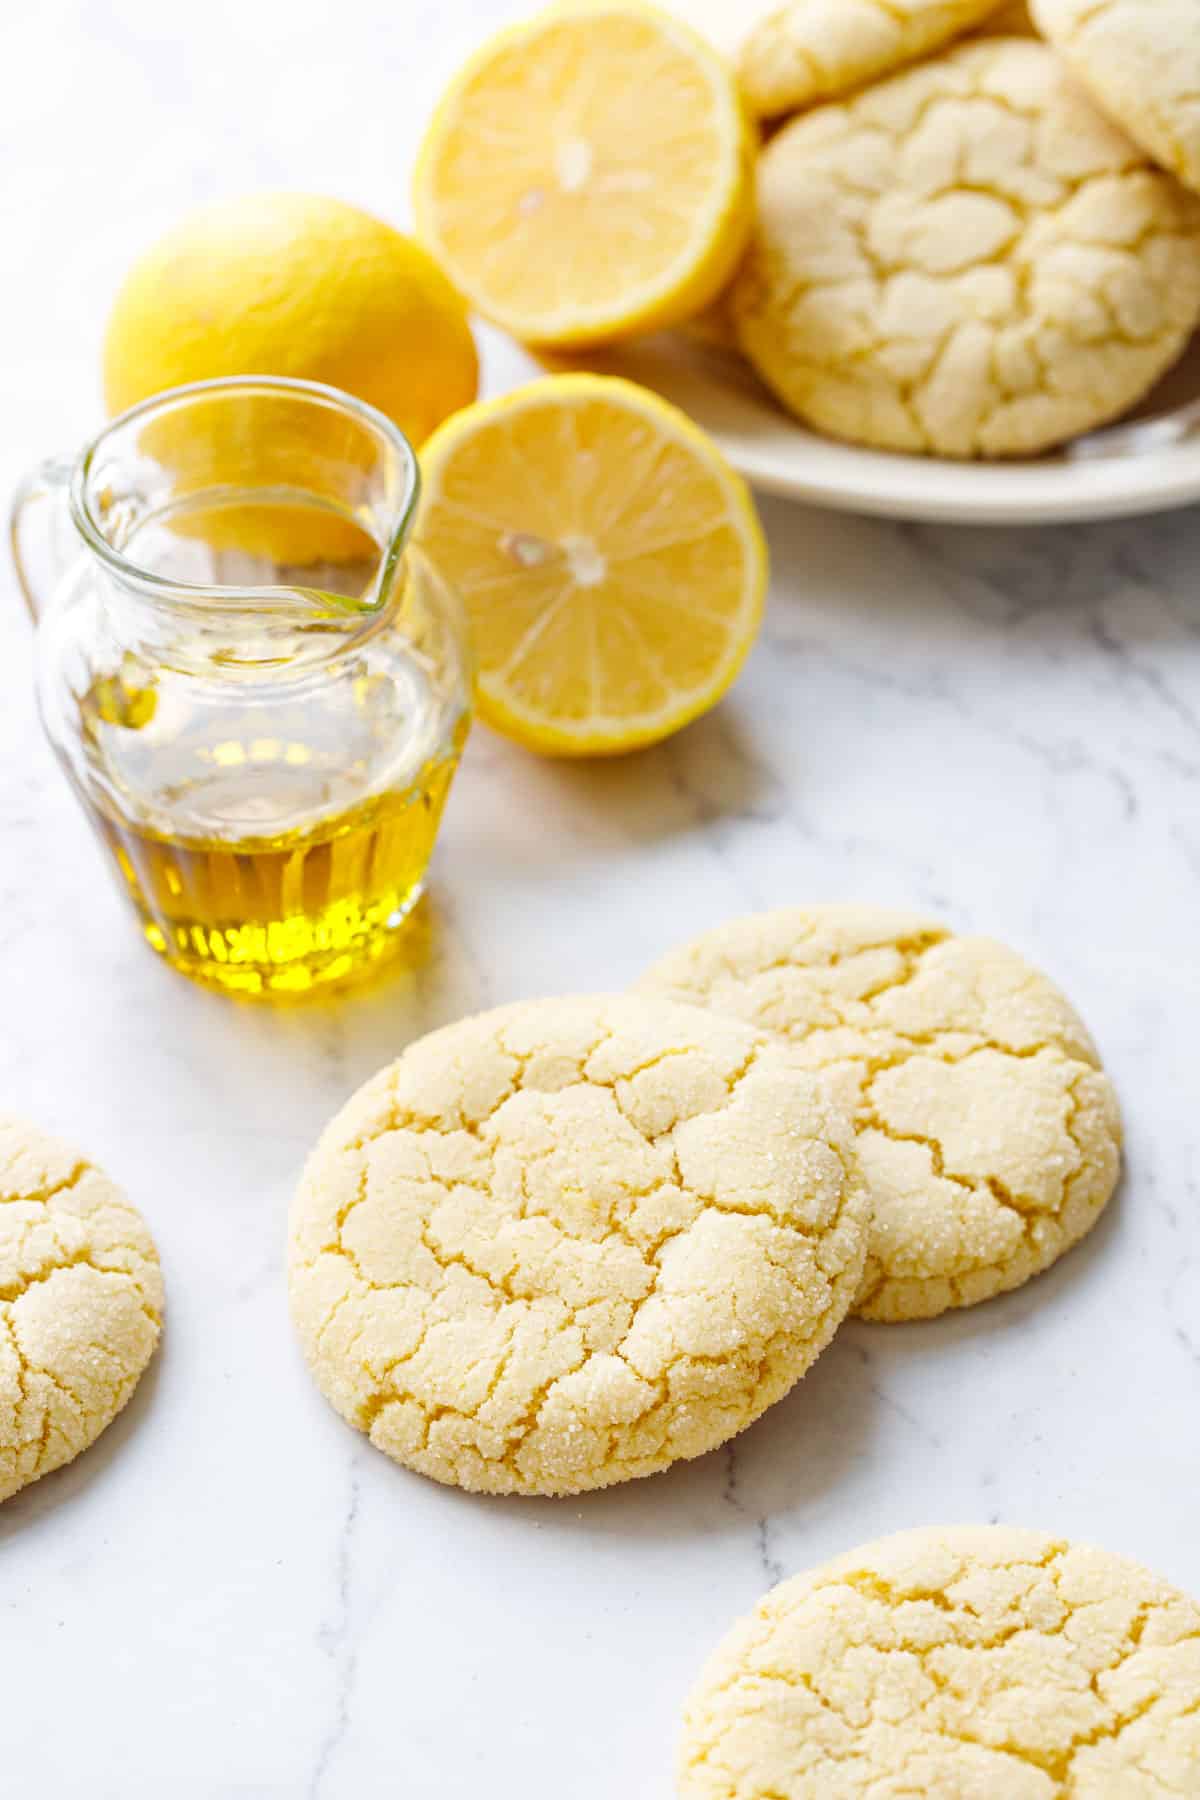 Crackly top Lemon Olive Oil Sugar Cookies on marble with a small glass pourer of olive oil, lemons, and a plate of more cookies in the background.